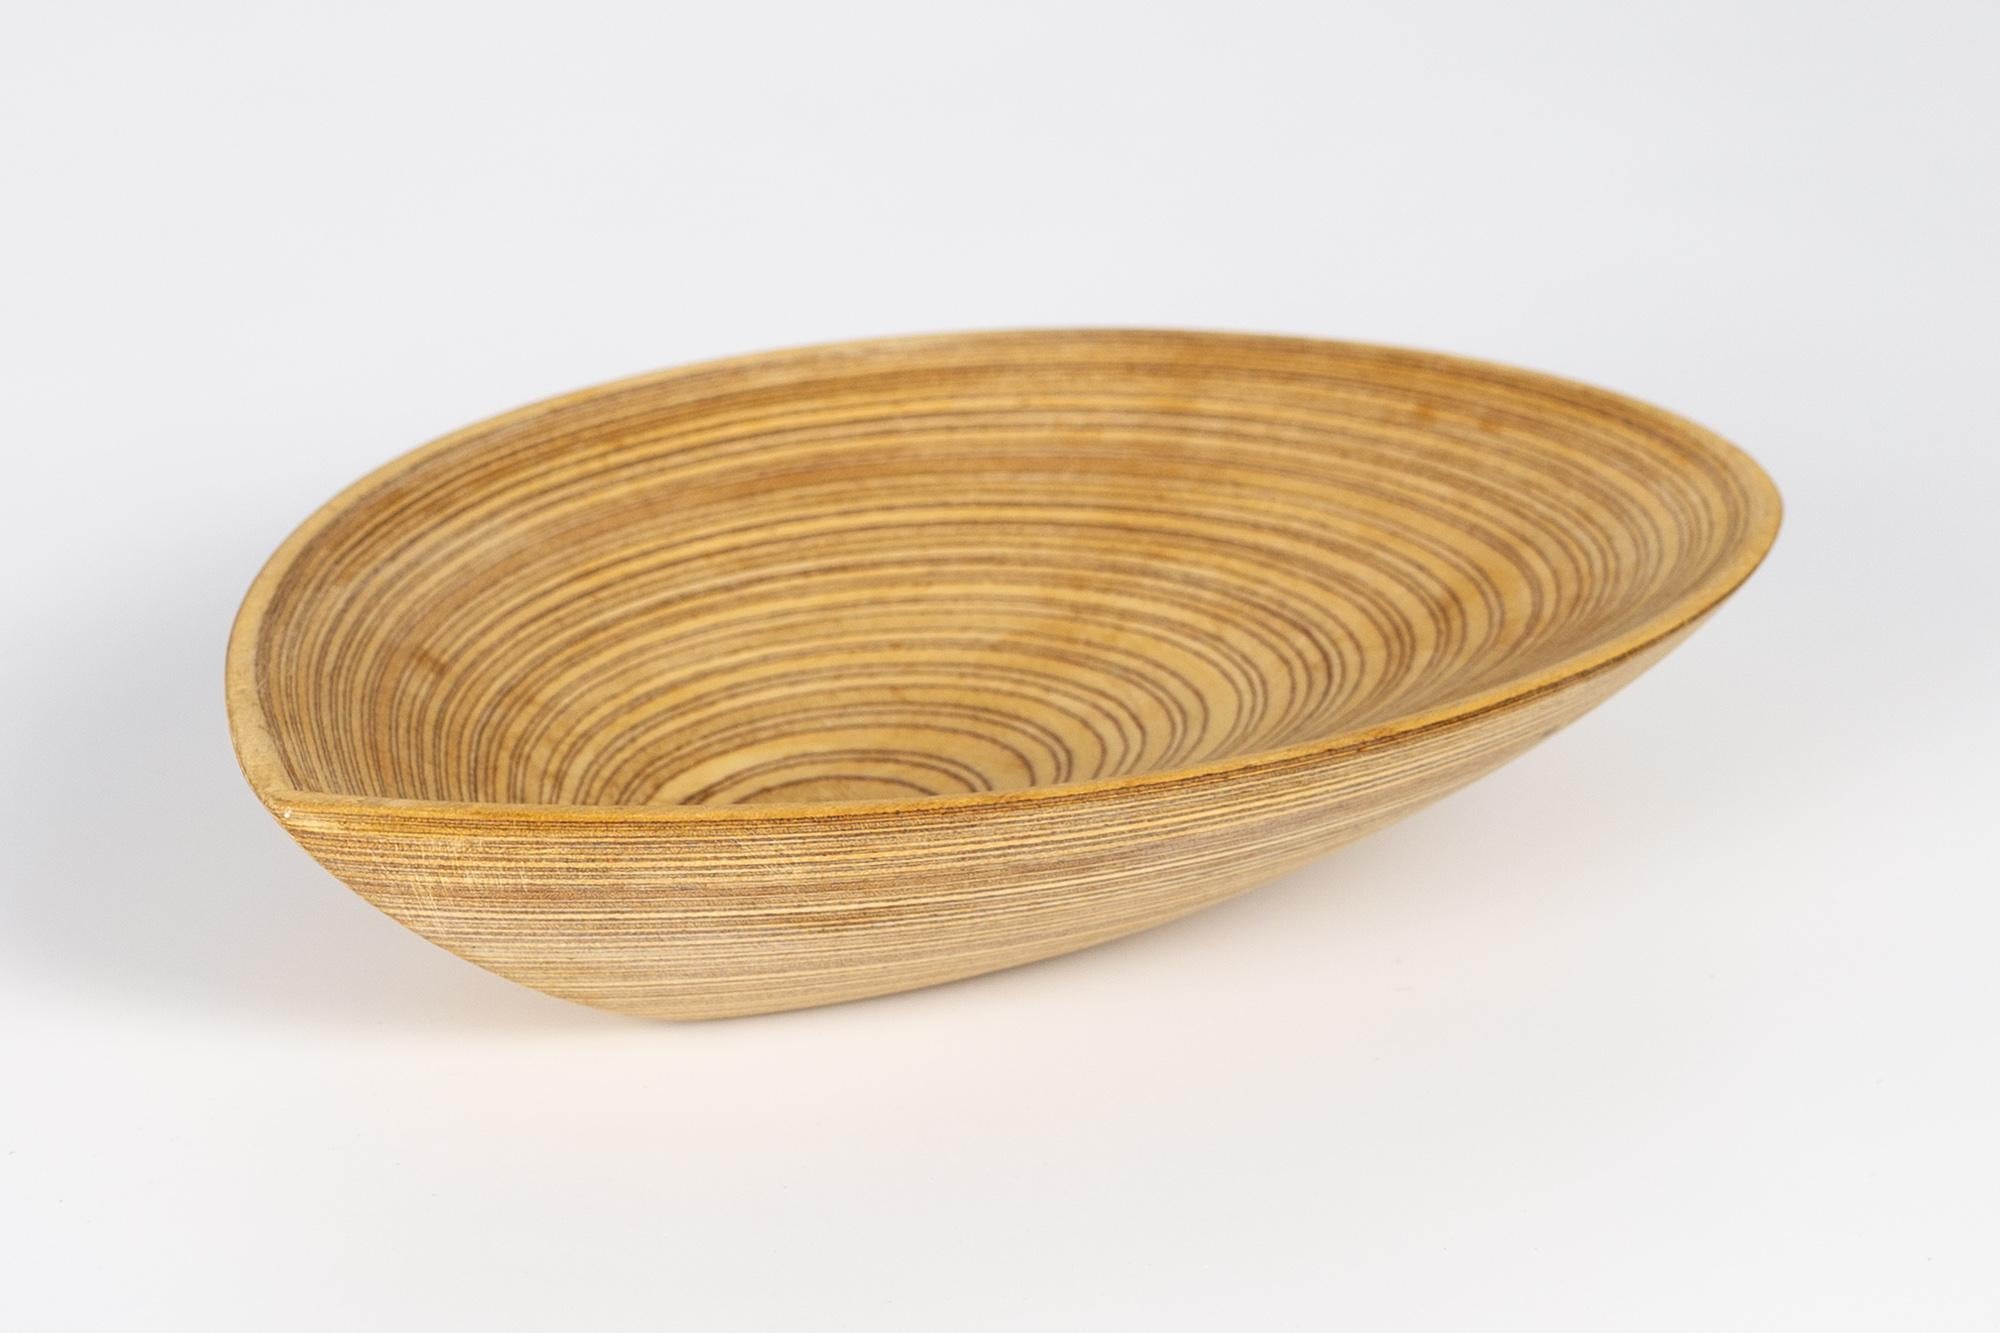 Tapio Wirkkala Finnish Hand Carved Leaf Platter
This piece measures: 6.5 wide x 4.5 deep x 1.25 inches high

This platter is in excellent vintage condition.

Each piece is carefully cleaned and packaged before being shipped to you.
  